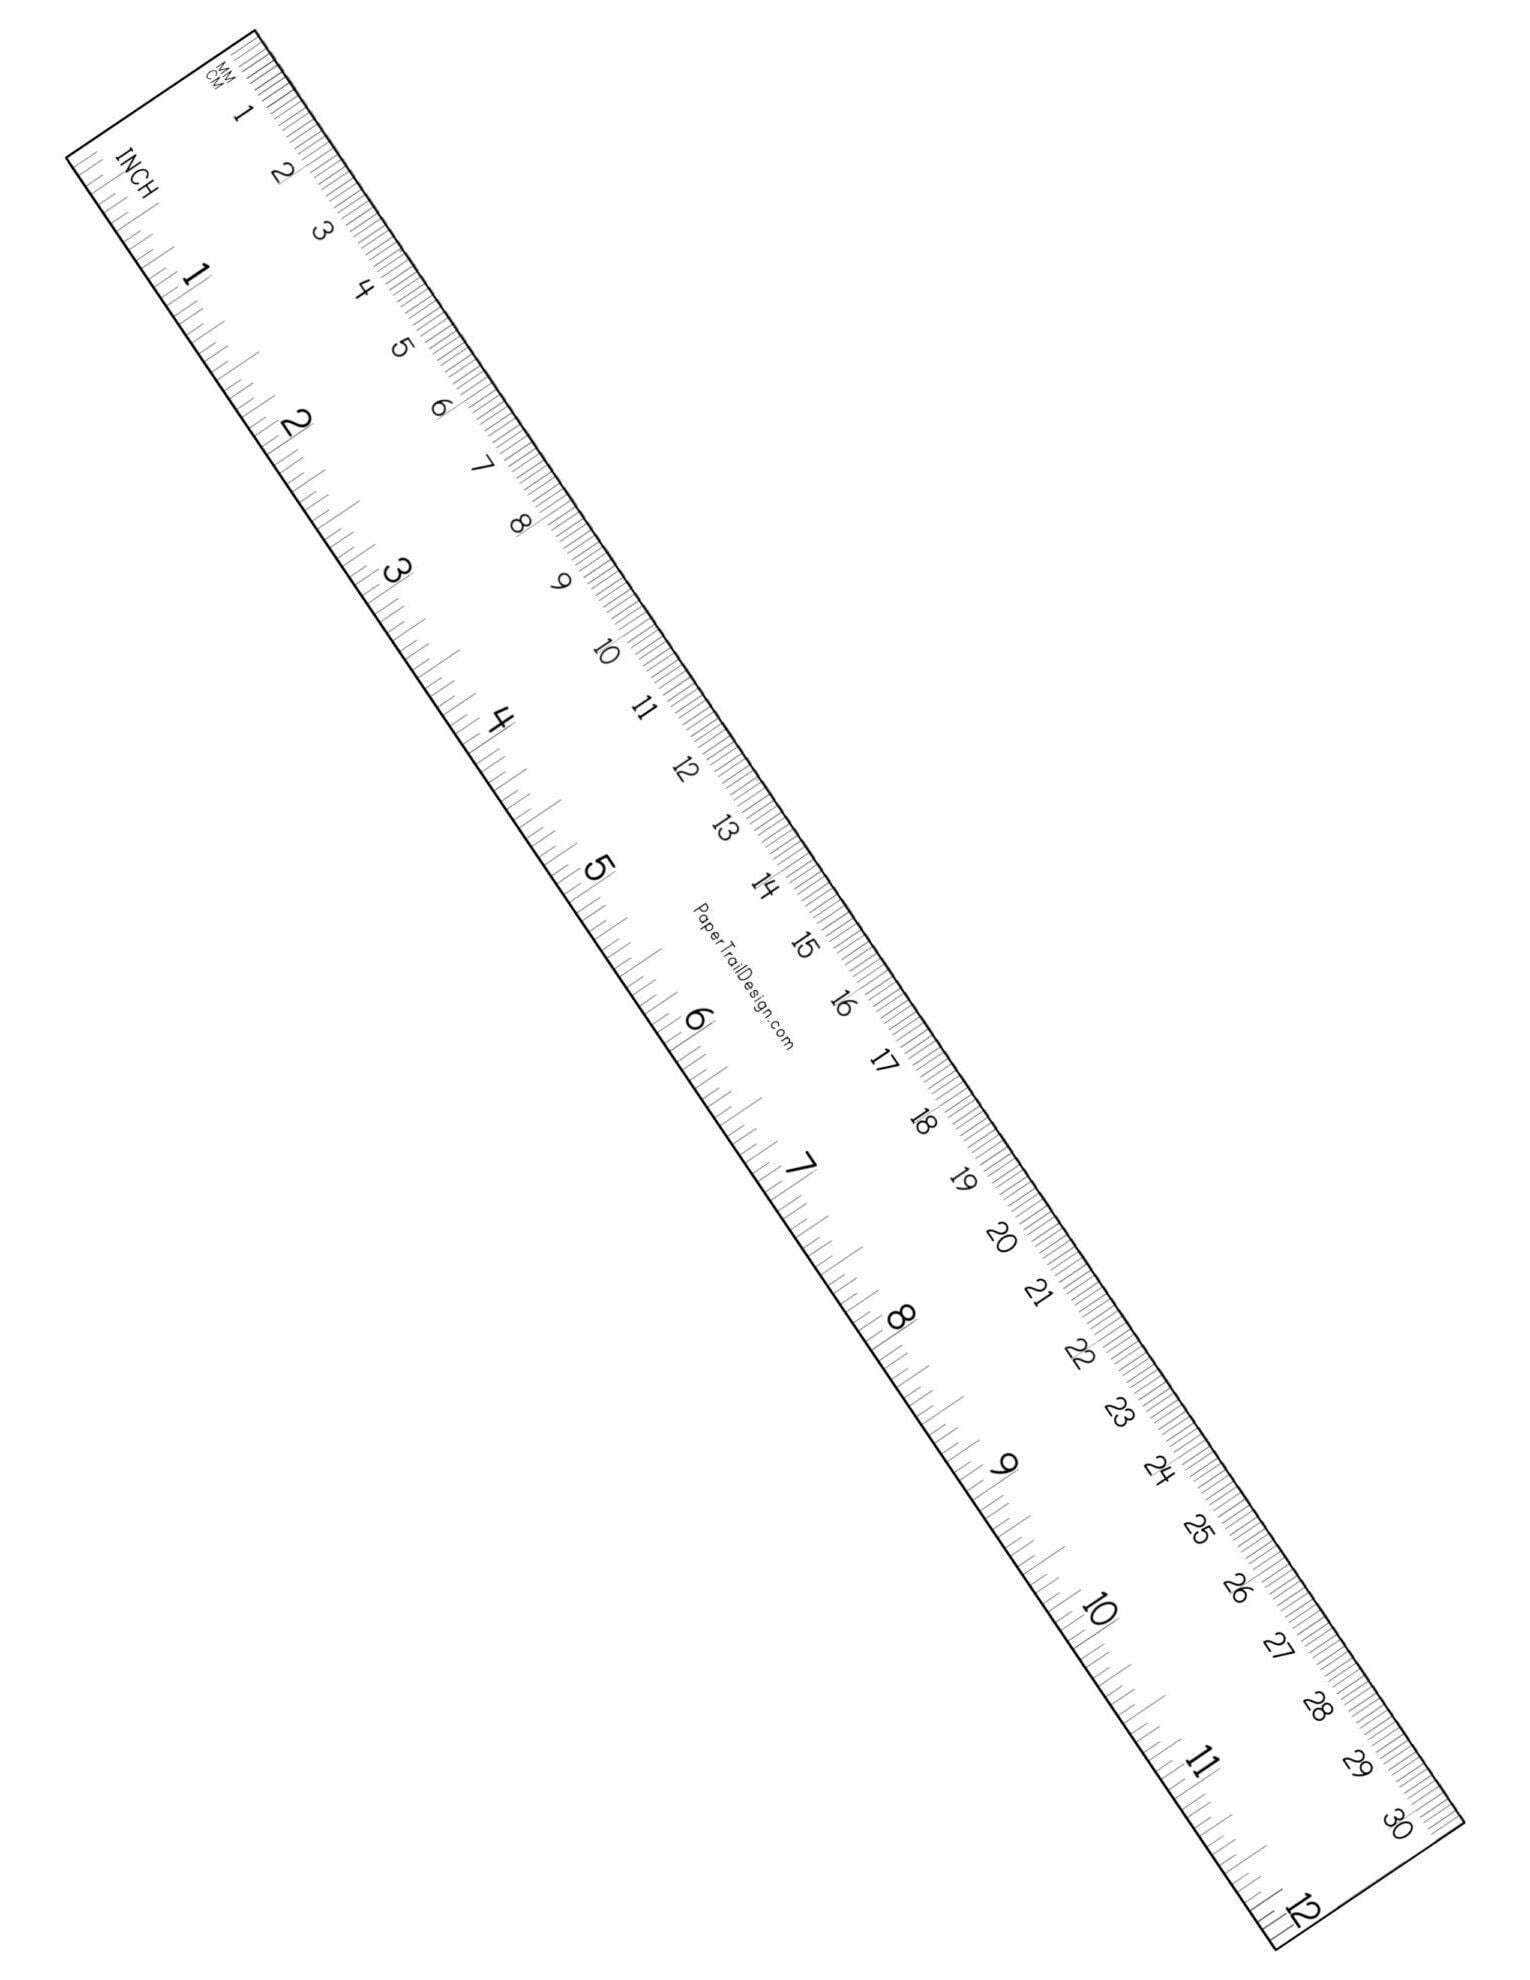 Free Printable Ruler inches And Cm Paper Trail Design Printable Ruler Ruler Paper Trail